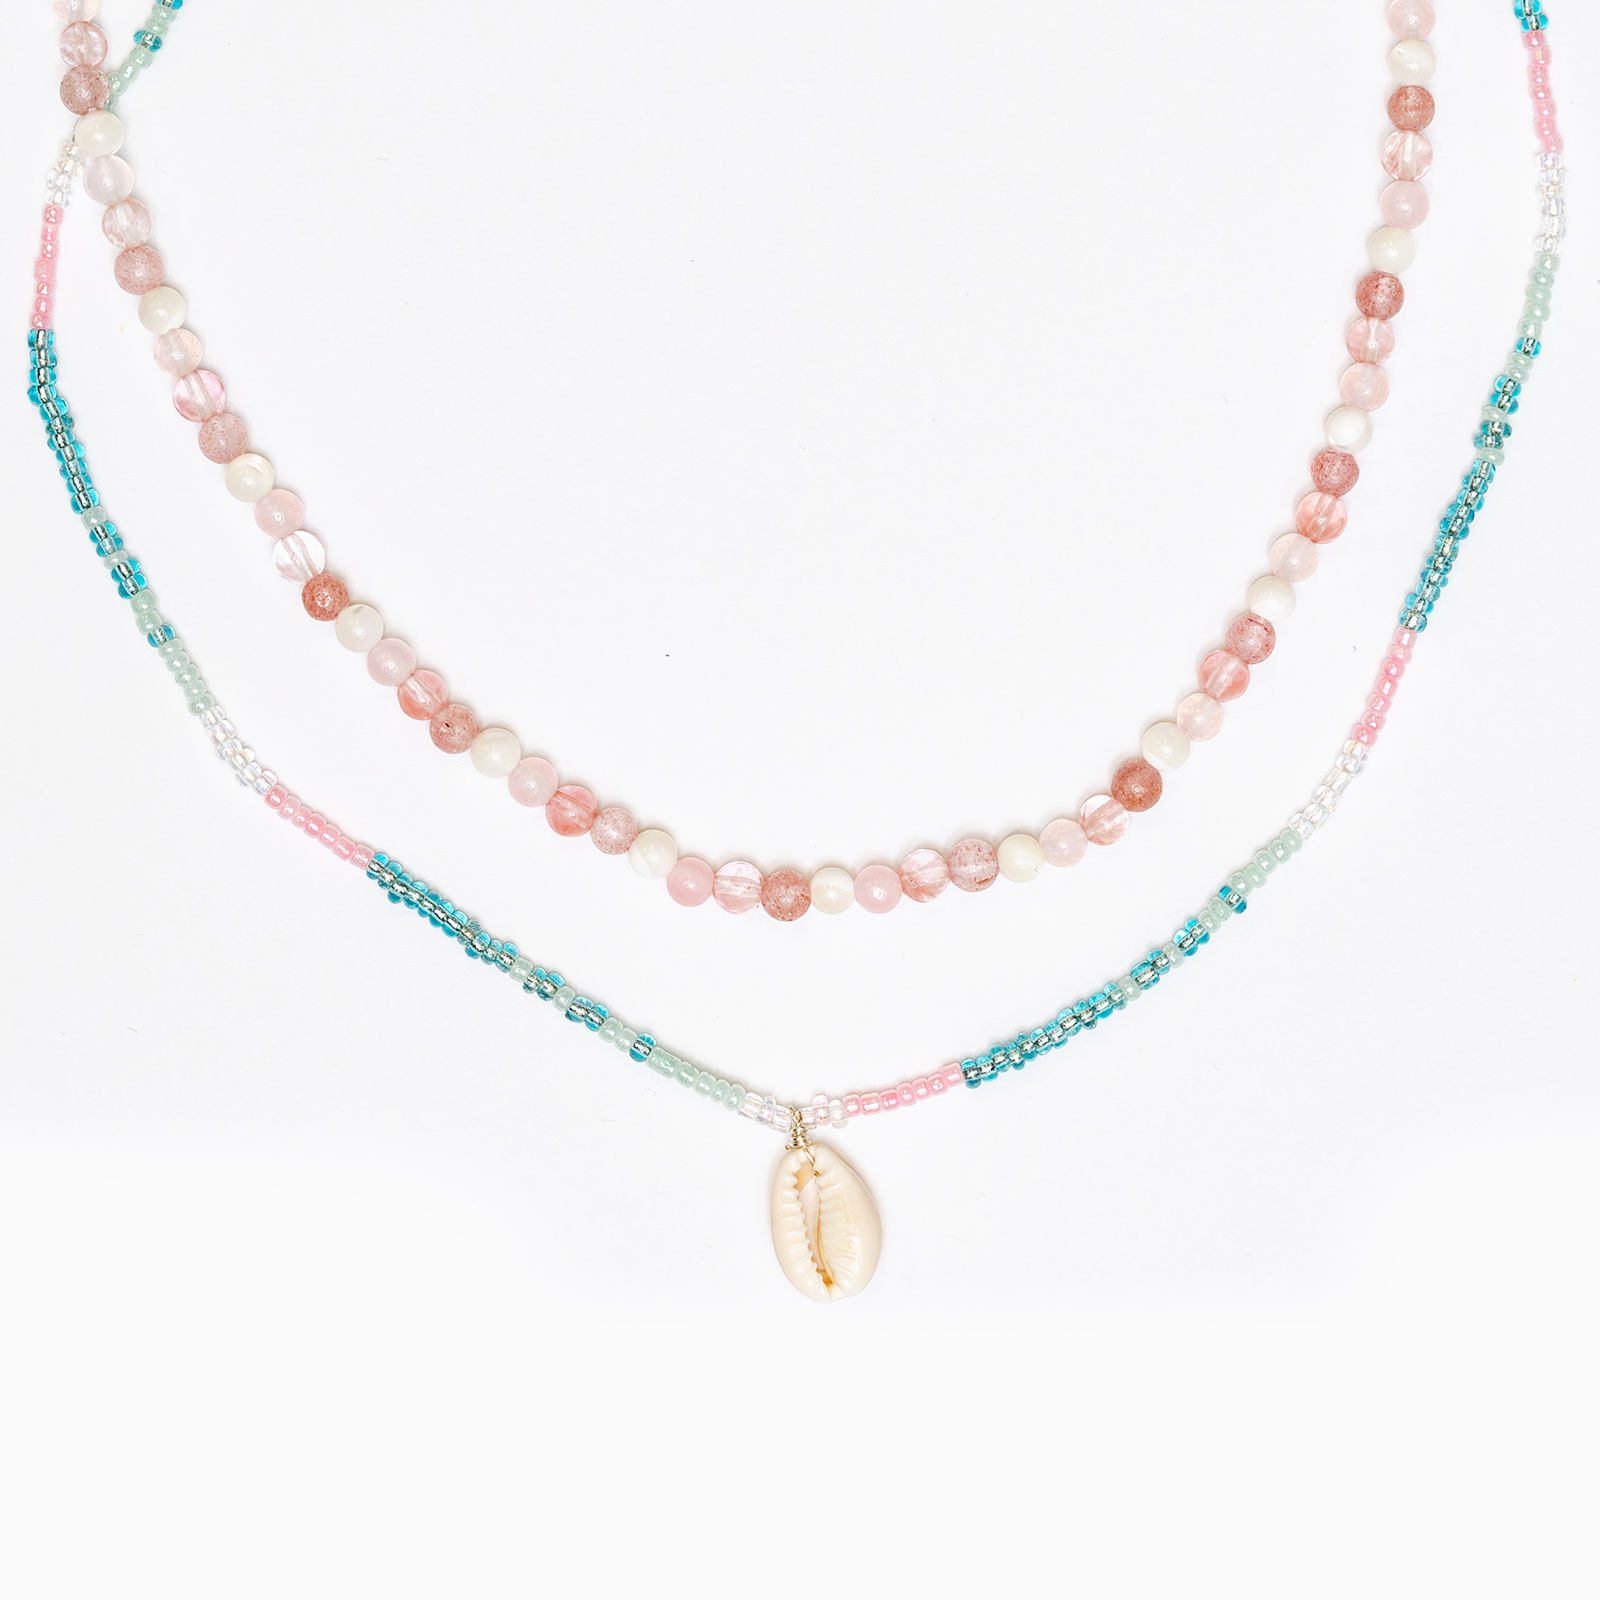 Cotton Candy Dreaming Necklace Set